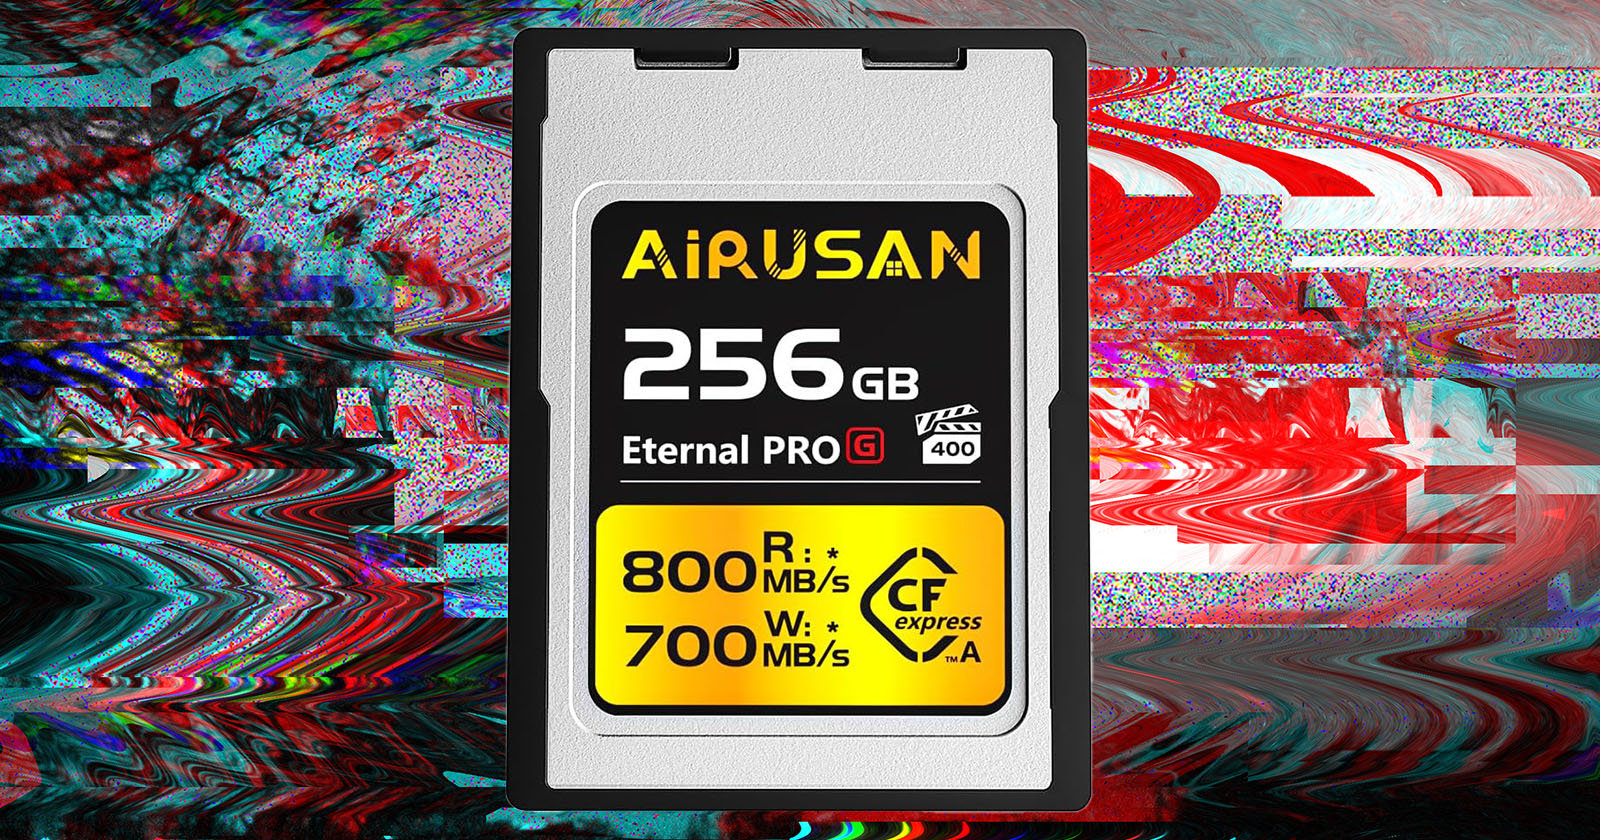 A 256gb airusan compact flash memory card with specs labeled 800 mb/s read and 700 mb/s write speed, centered over a colorful, swirling digital art background.